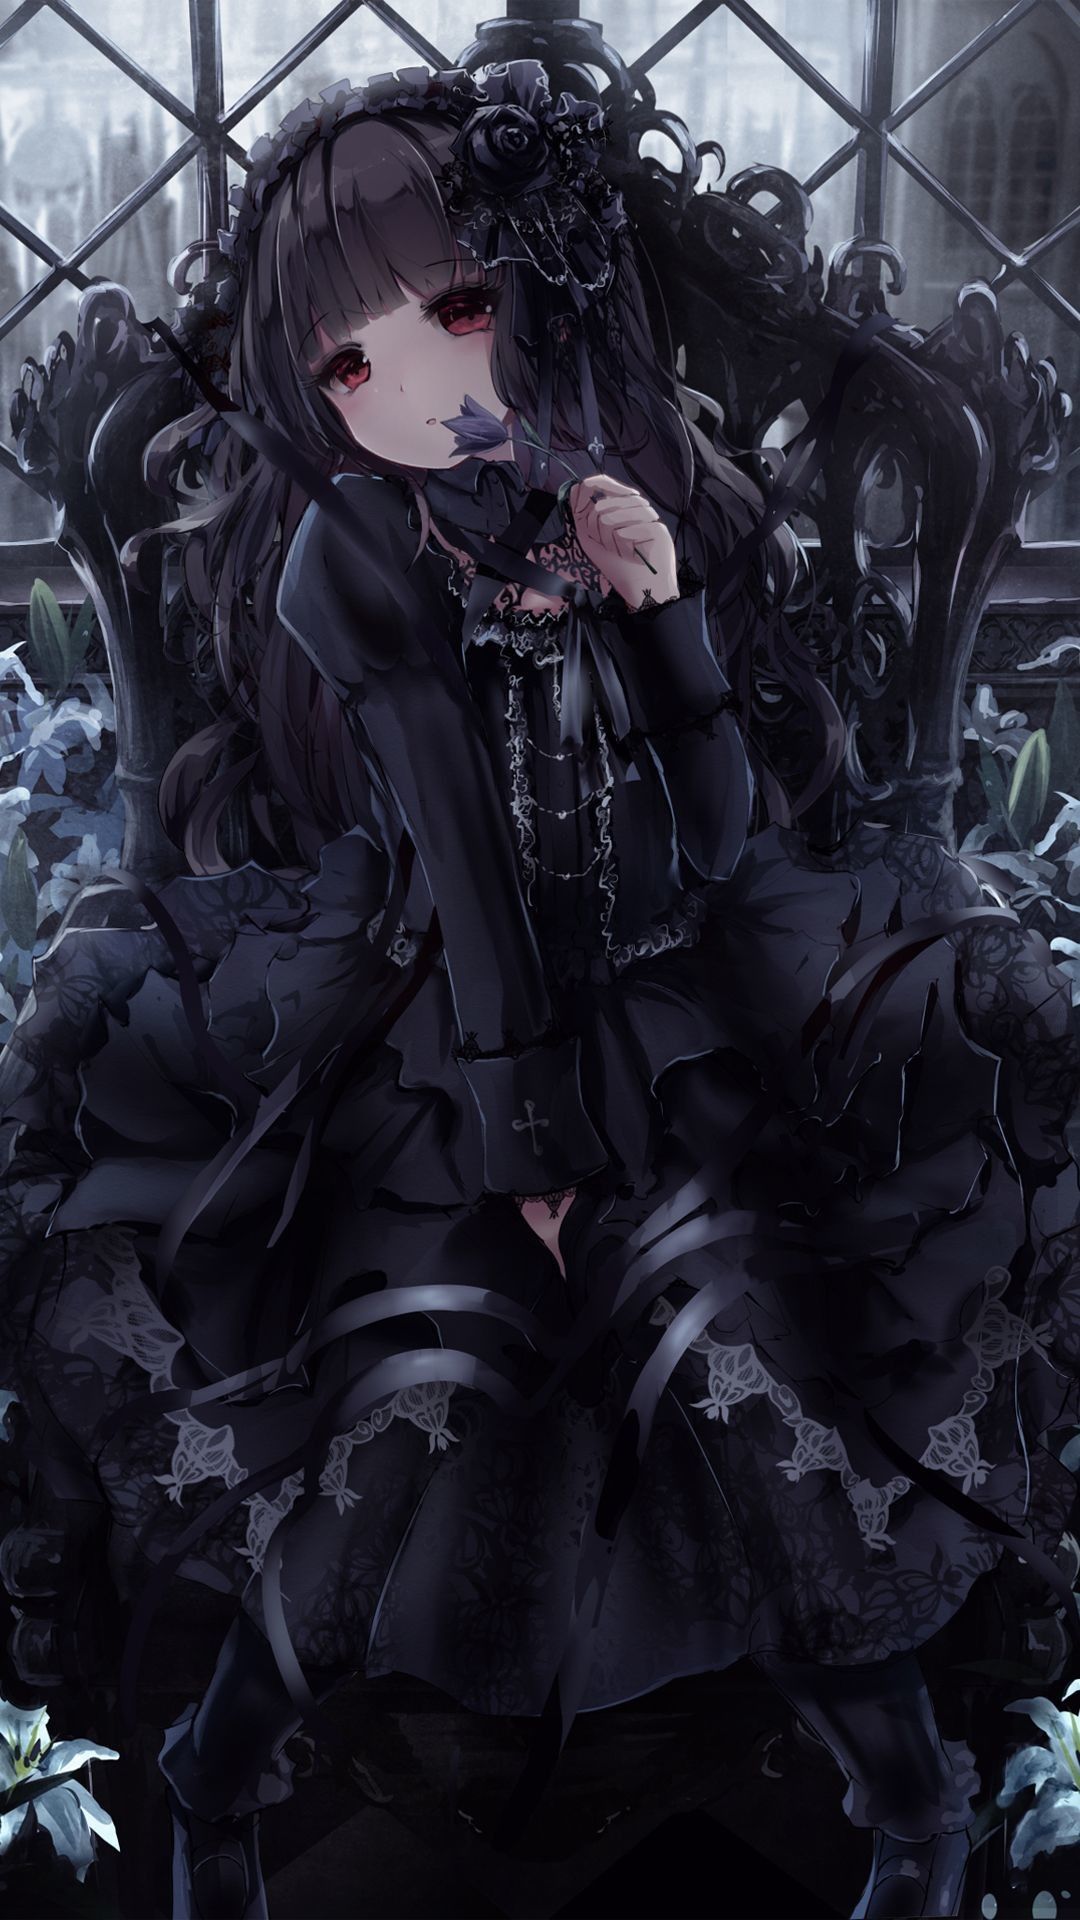 prompthunt wednesday addams portrait of a cute moody gothic anime girl  glistening pale white skin black eyeliner black pigtails finely detailed  victorian black dress with white collars haunted house backdrop 2d black